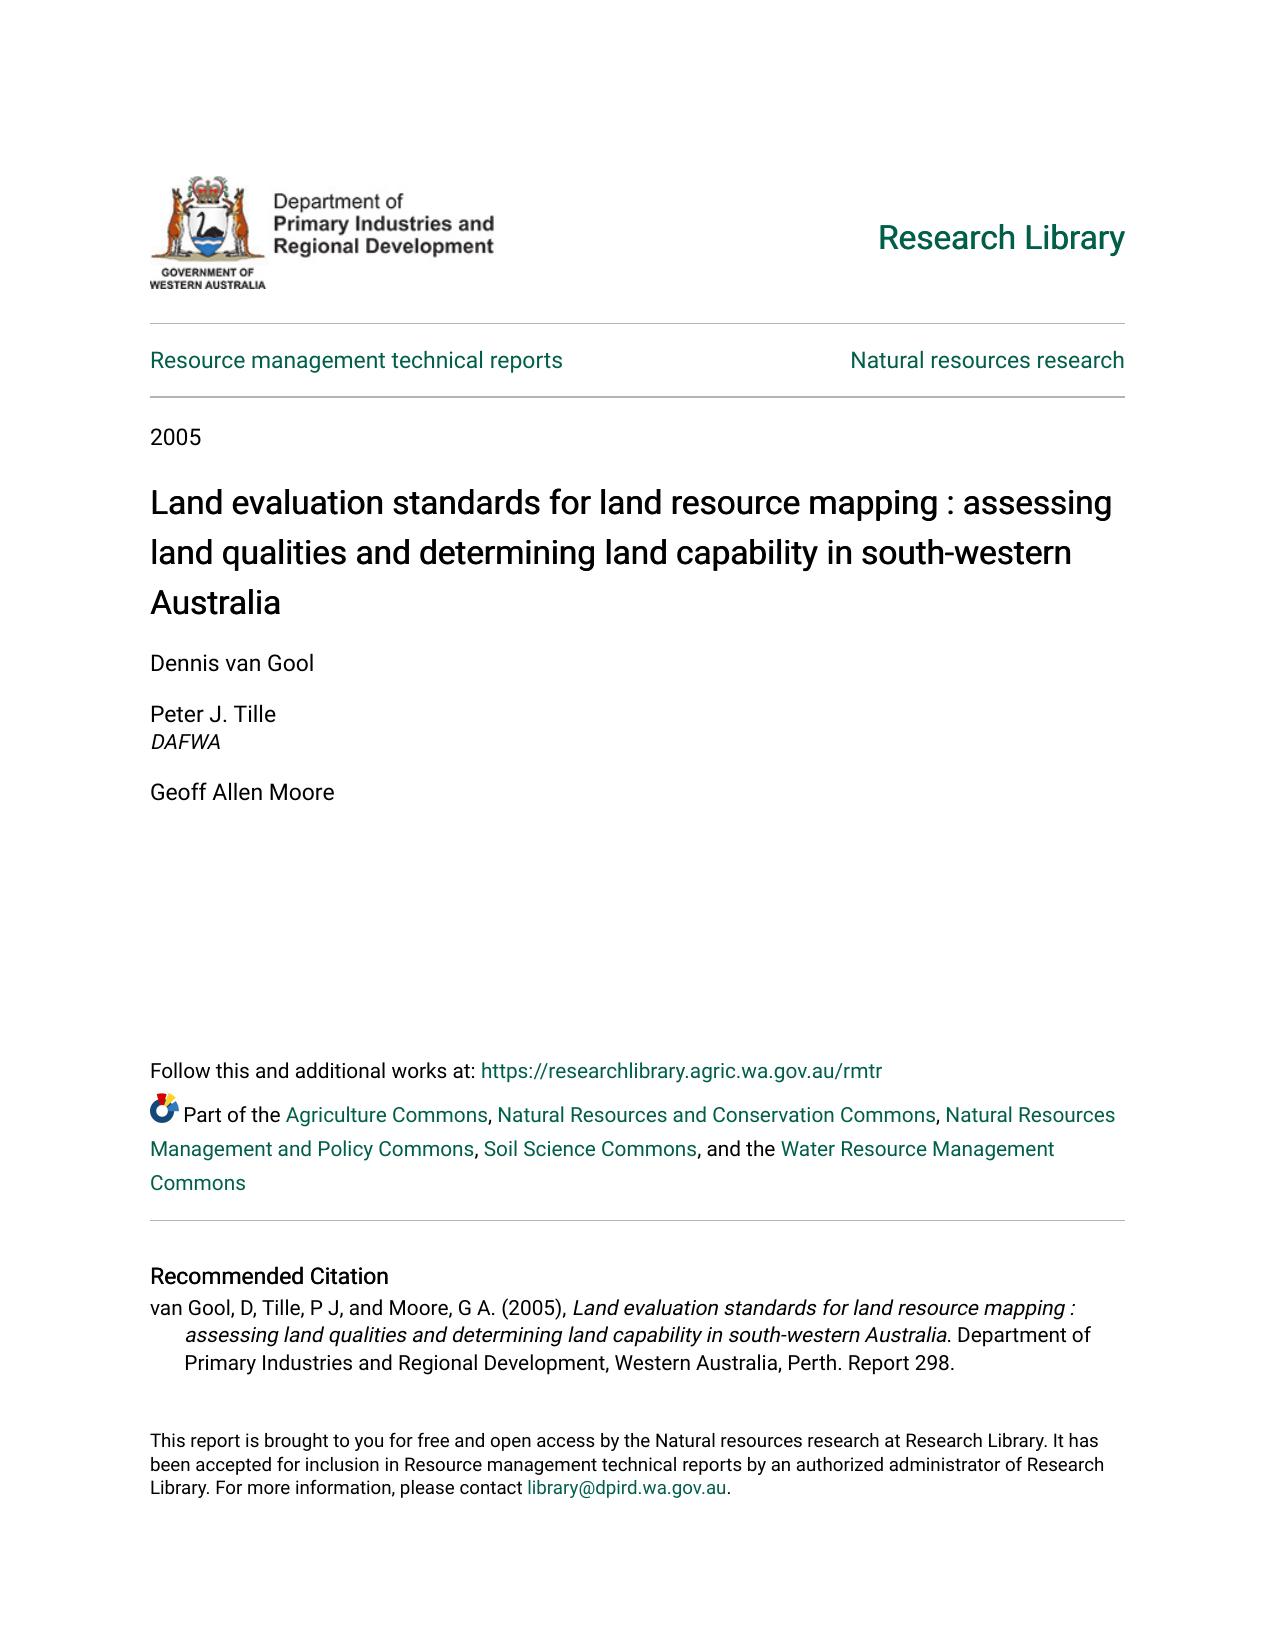 Land evaluation standards for land resource mapping : assessing land qualities and determining land capability in south-western Australia